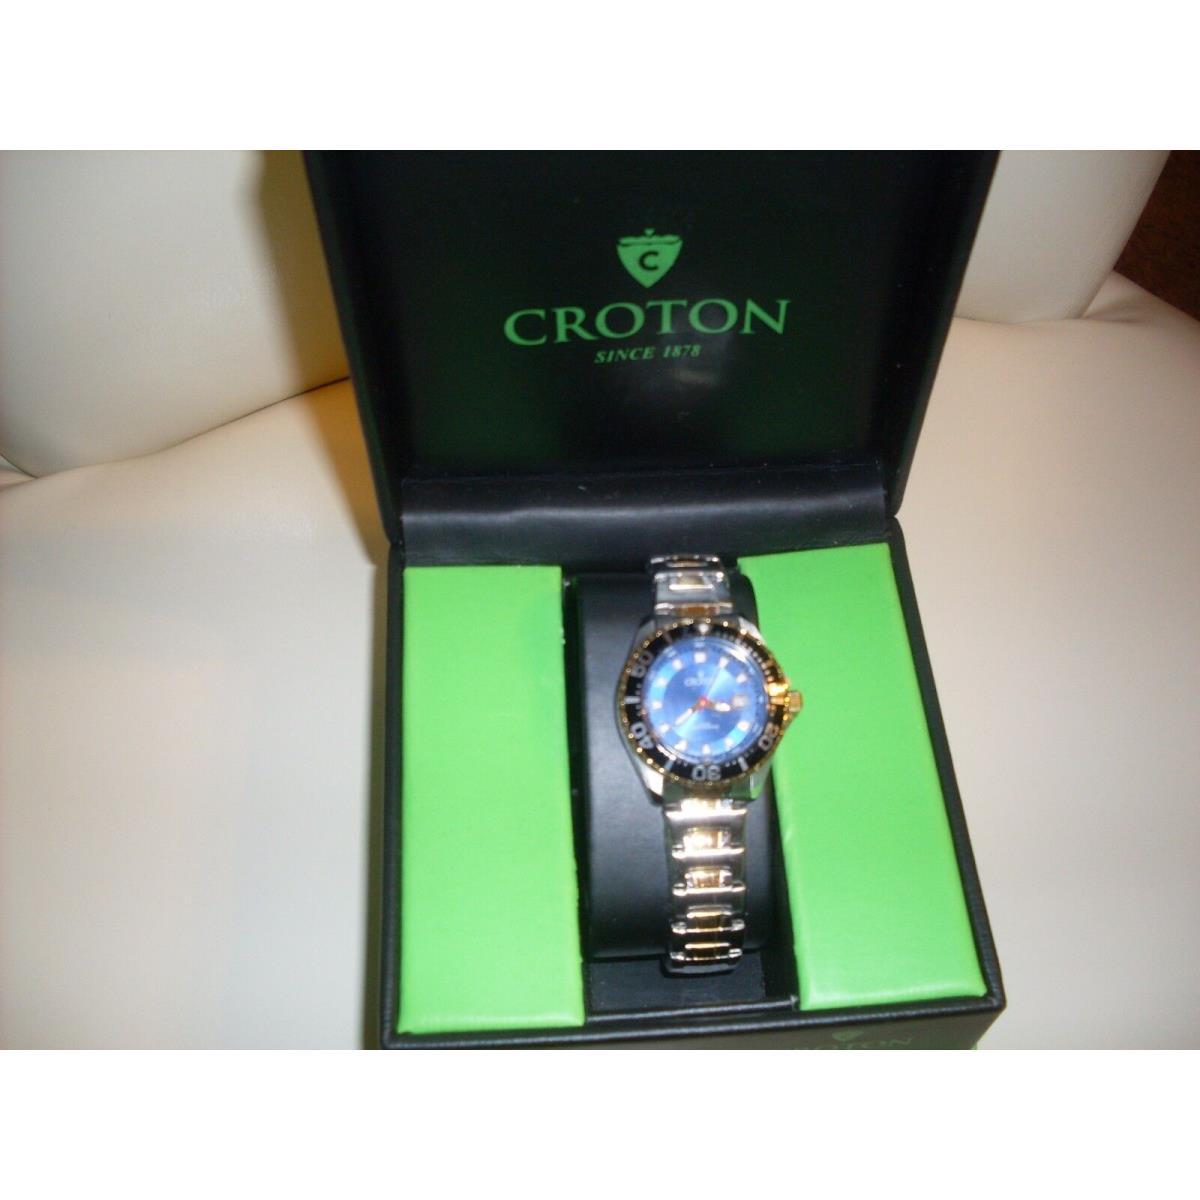 Croton Aquamatic Stainless Steel Gold Bracelet Blue Dial Watch CA201228